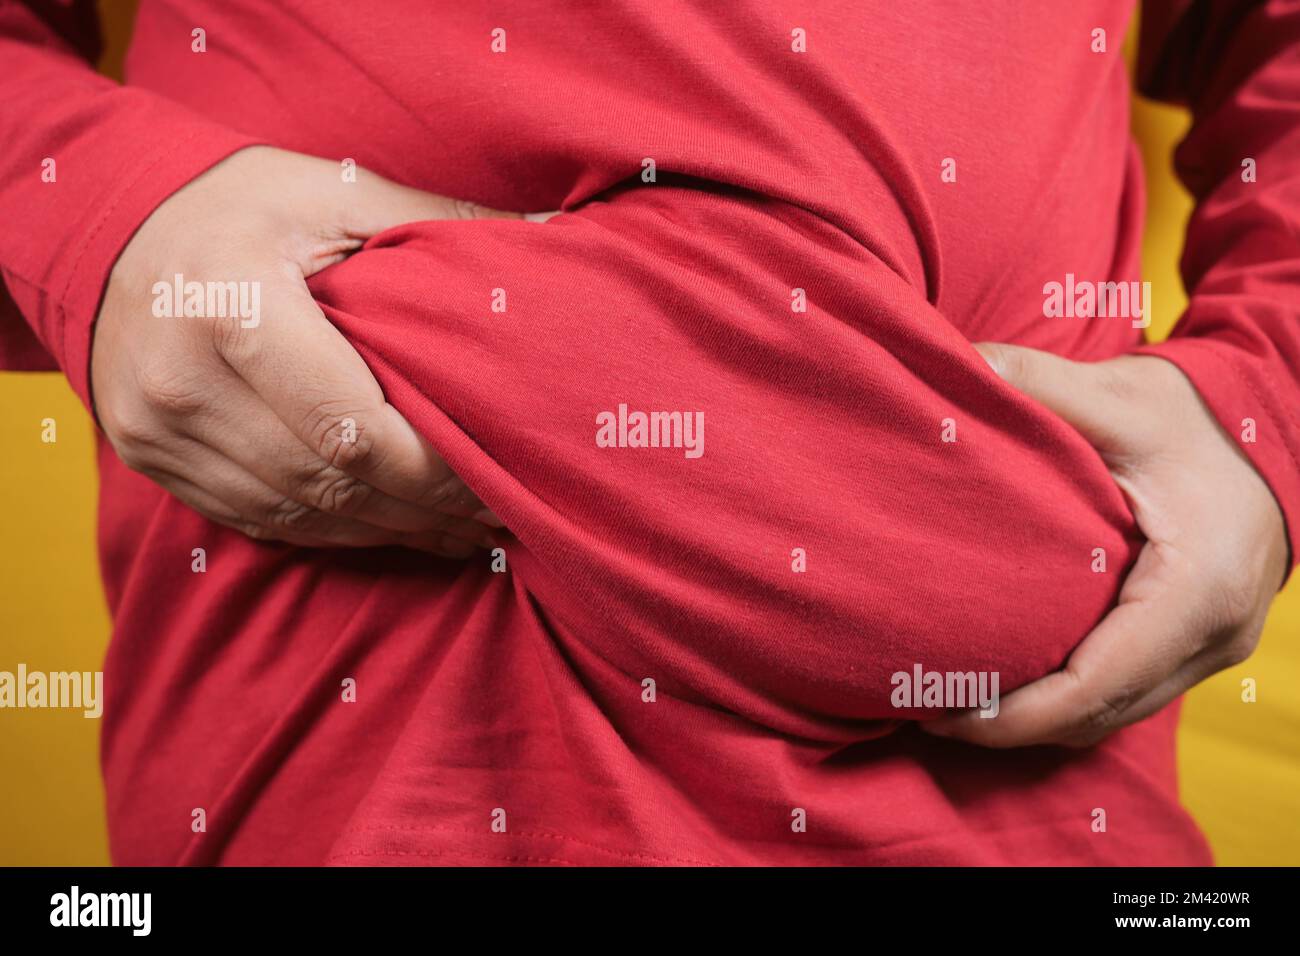 man's hand holding excessive belly fat, overweight concept Stock Photo